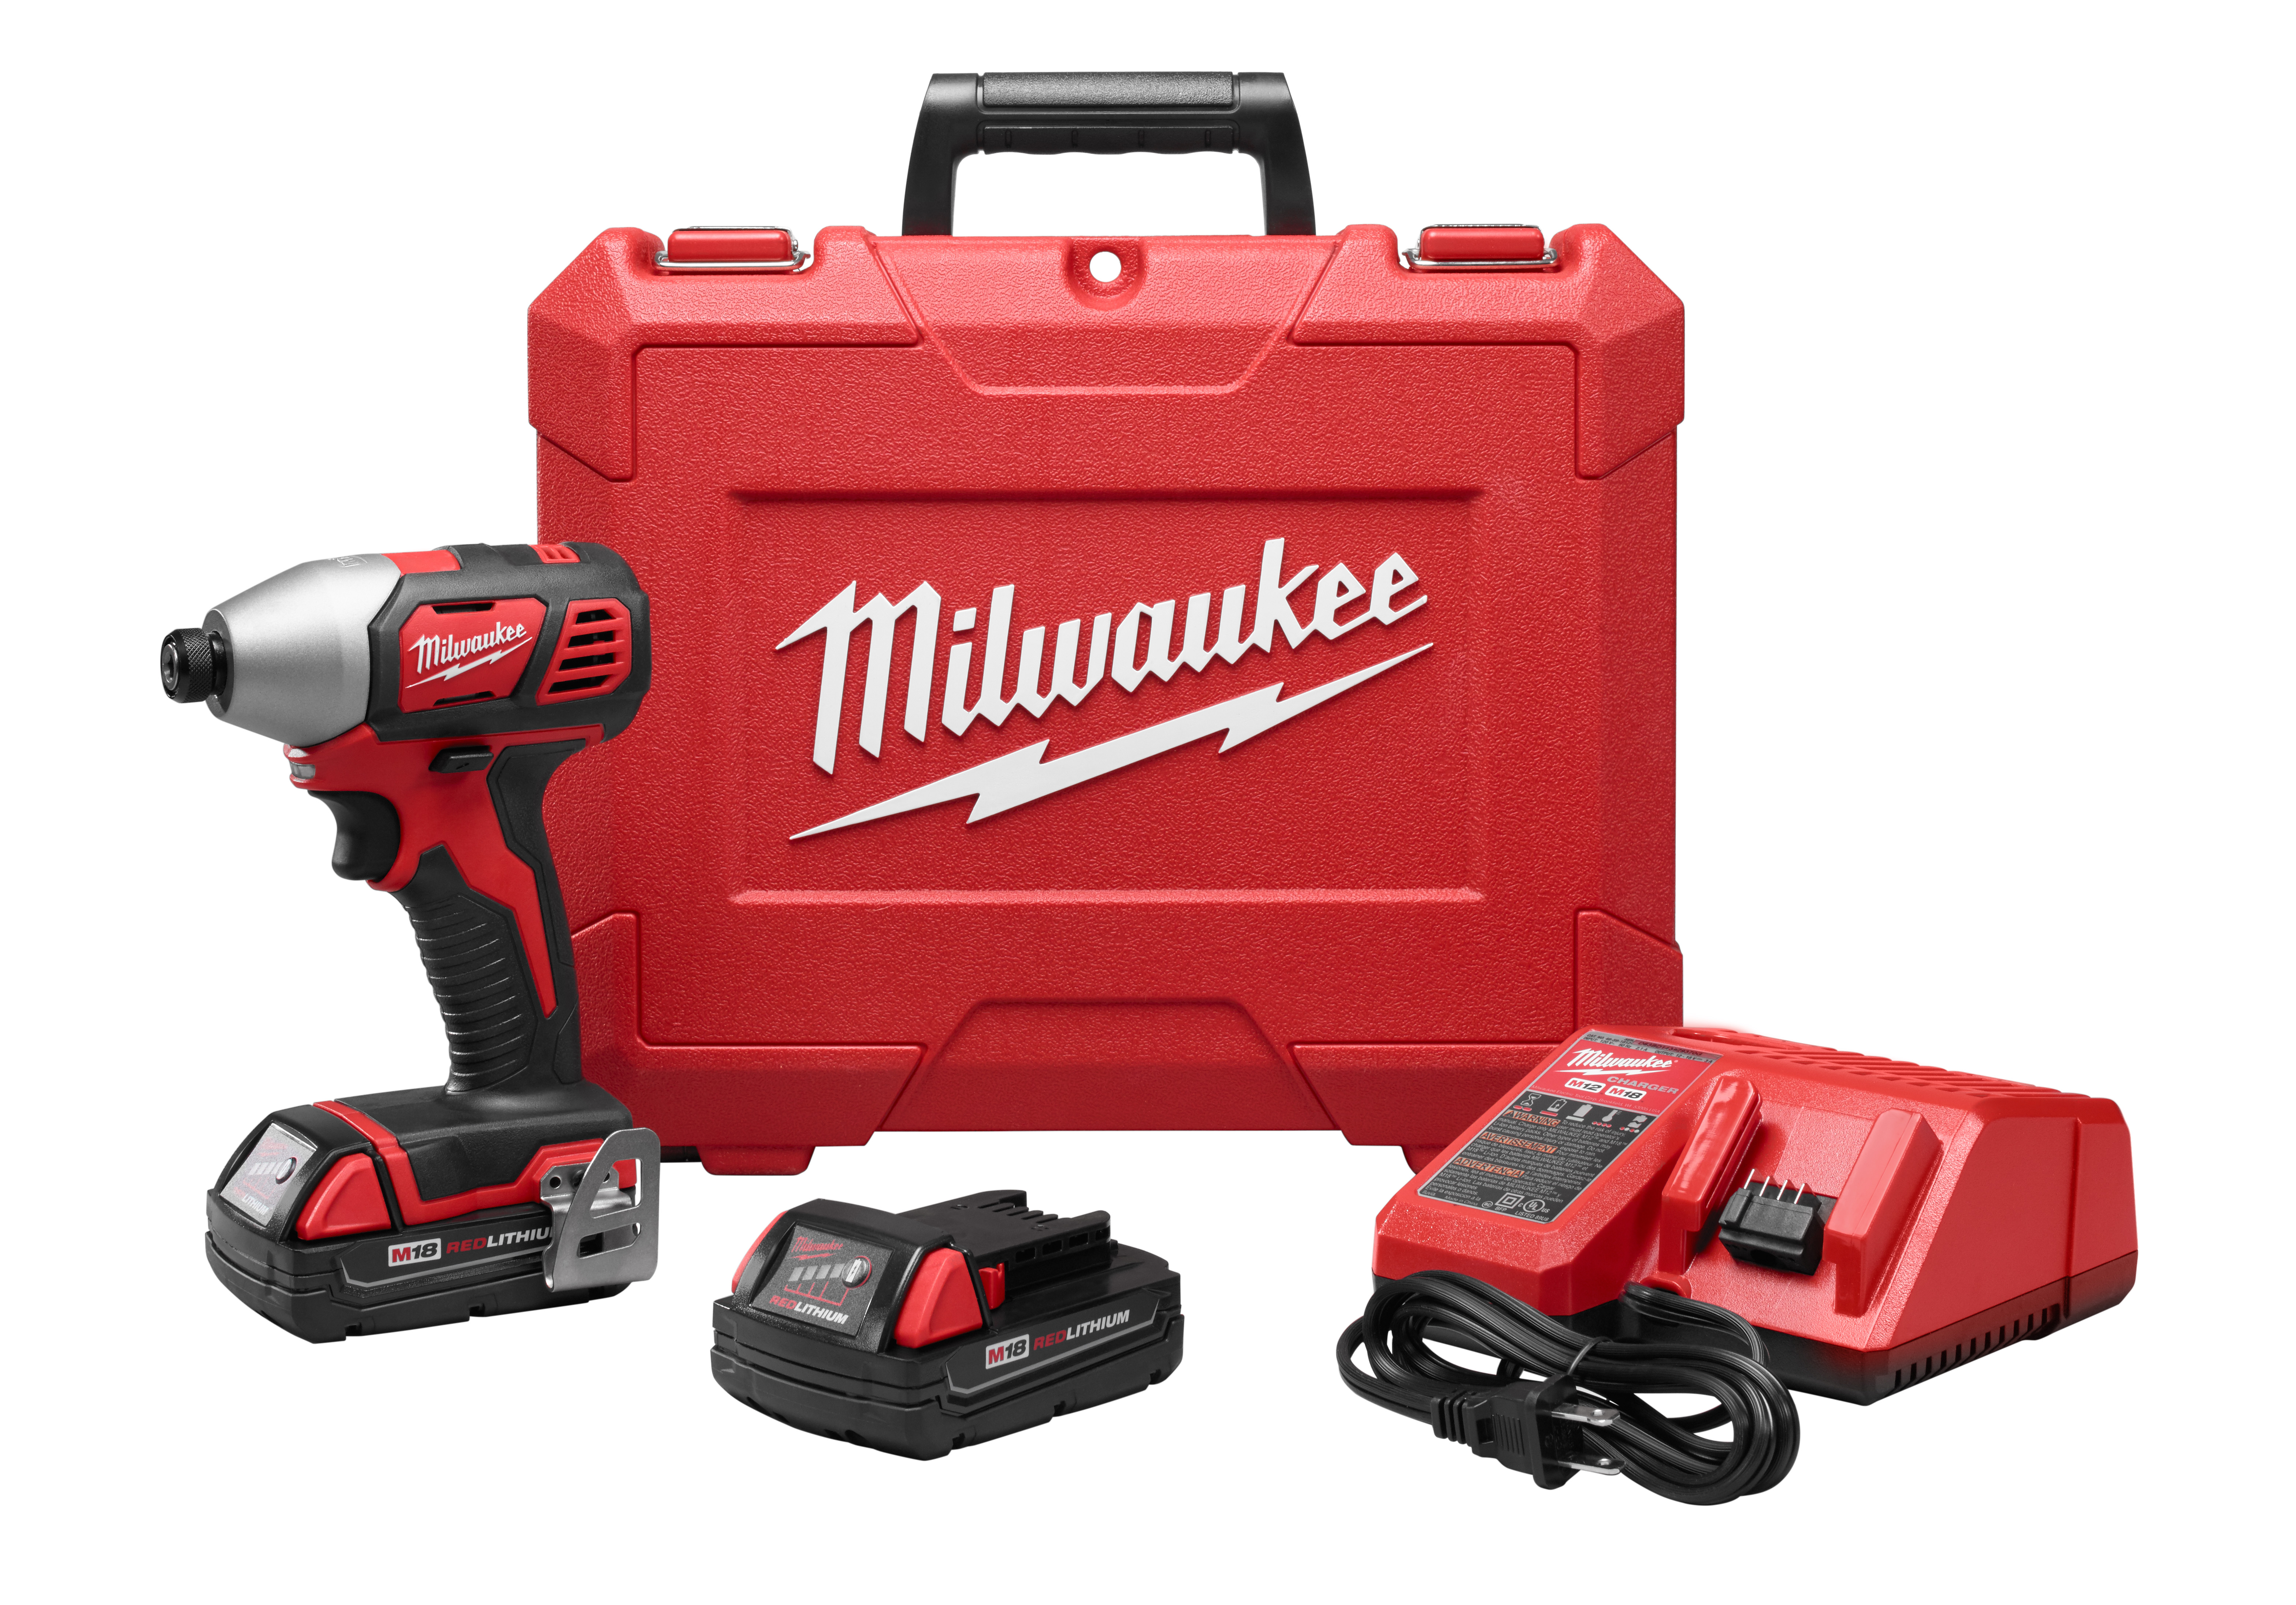 Impact Driver Kit-Reconditioned